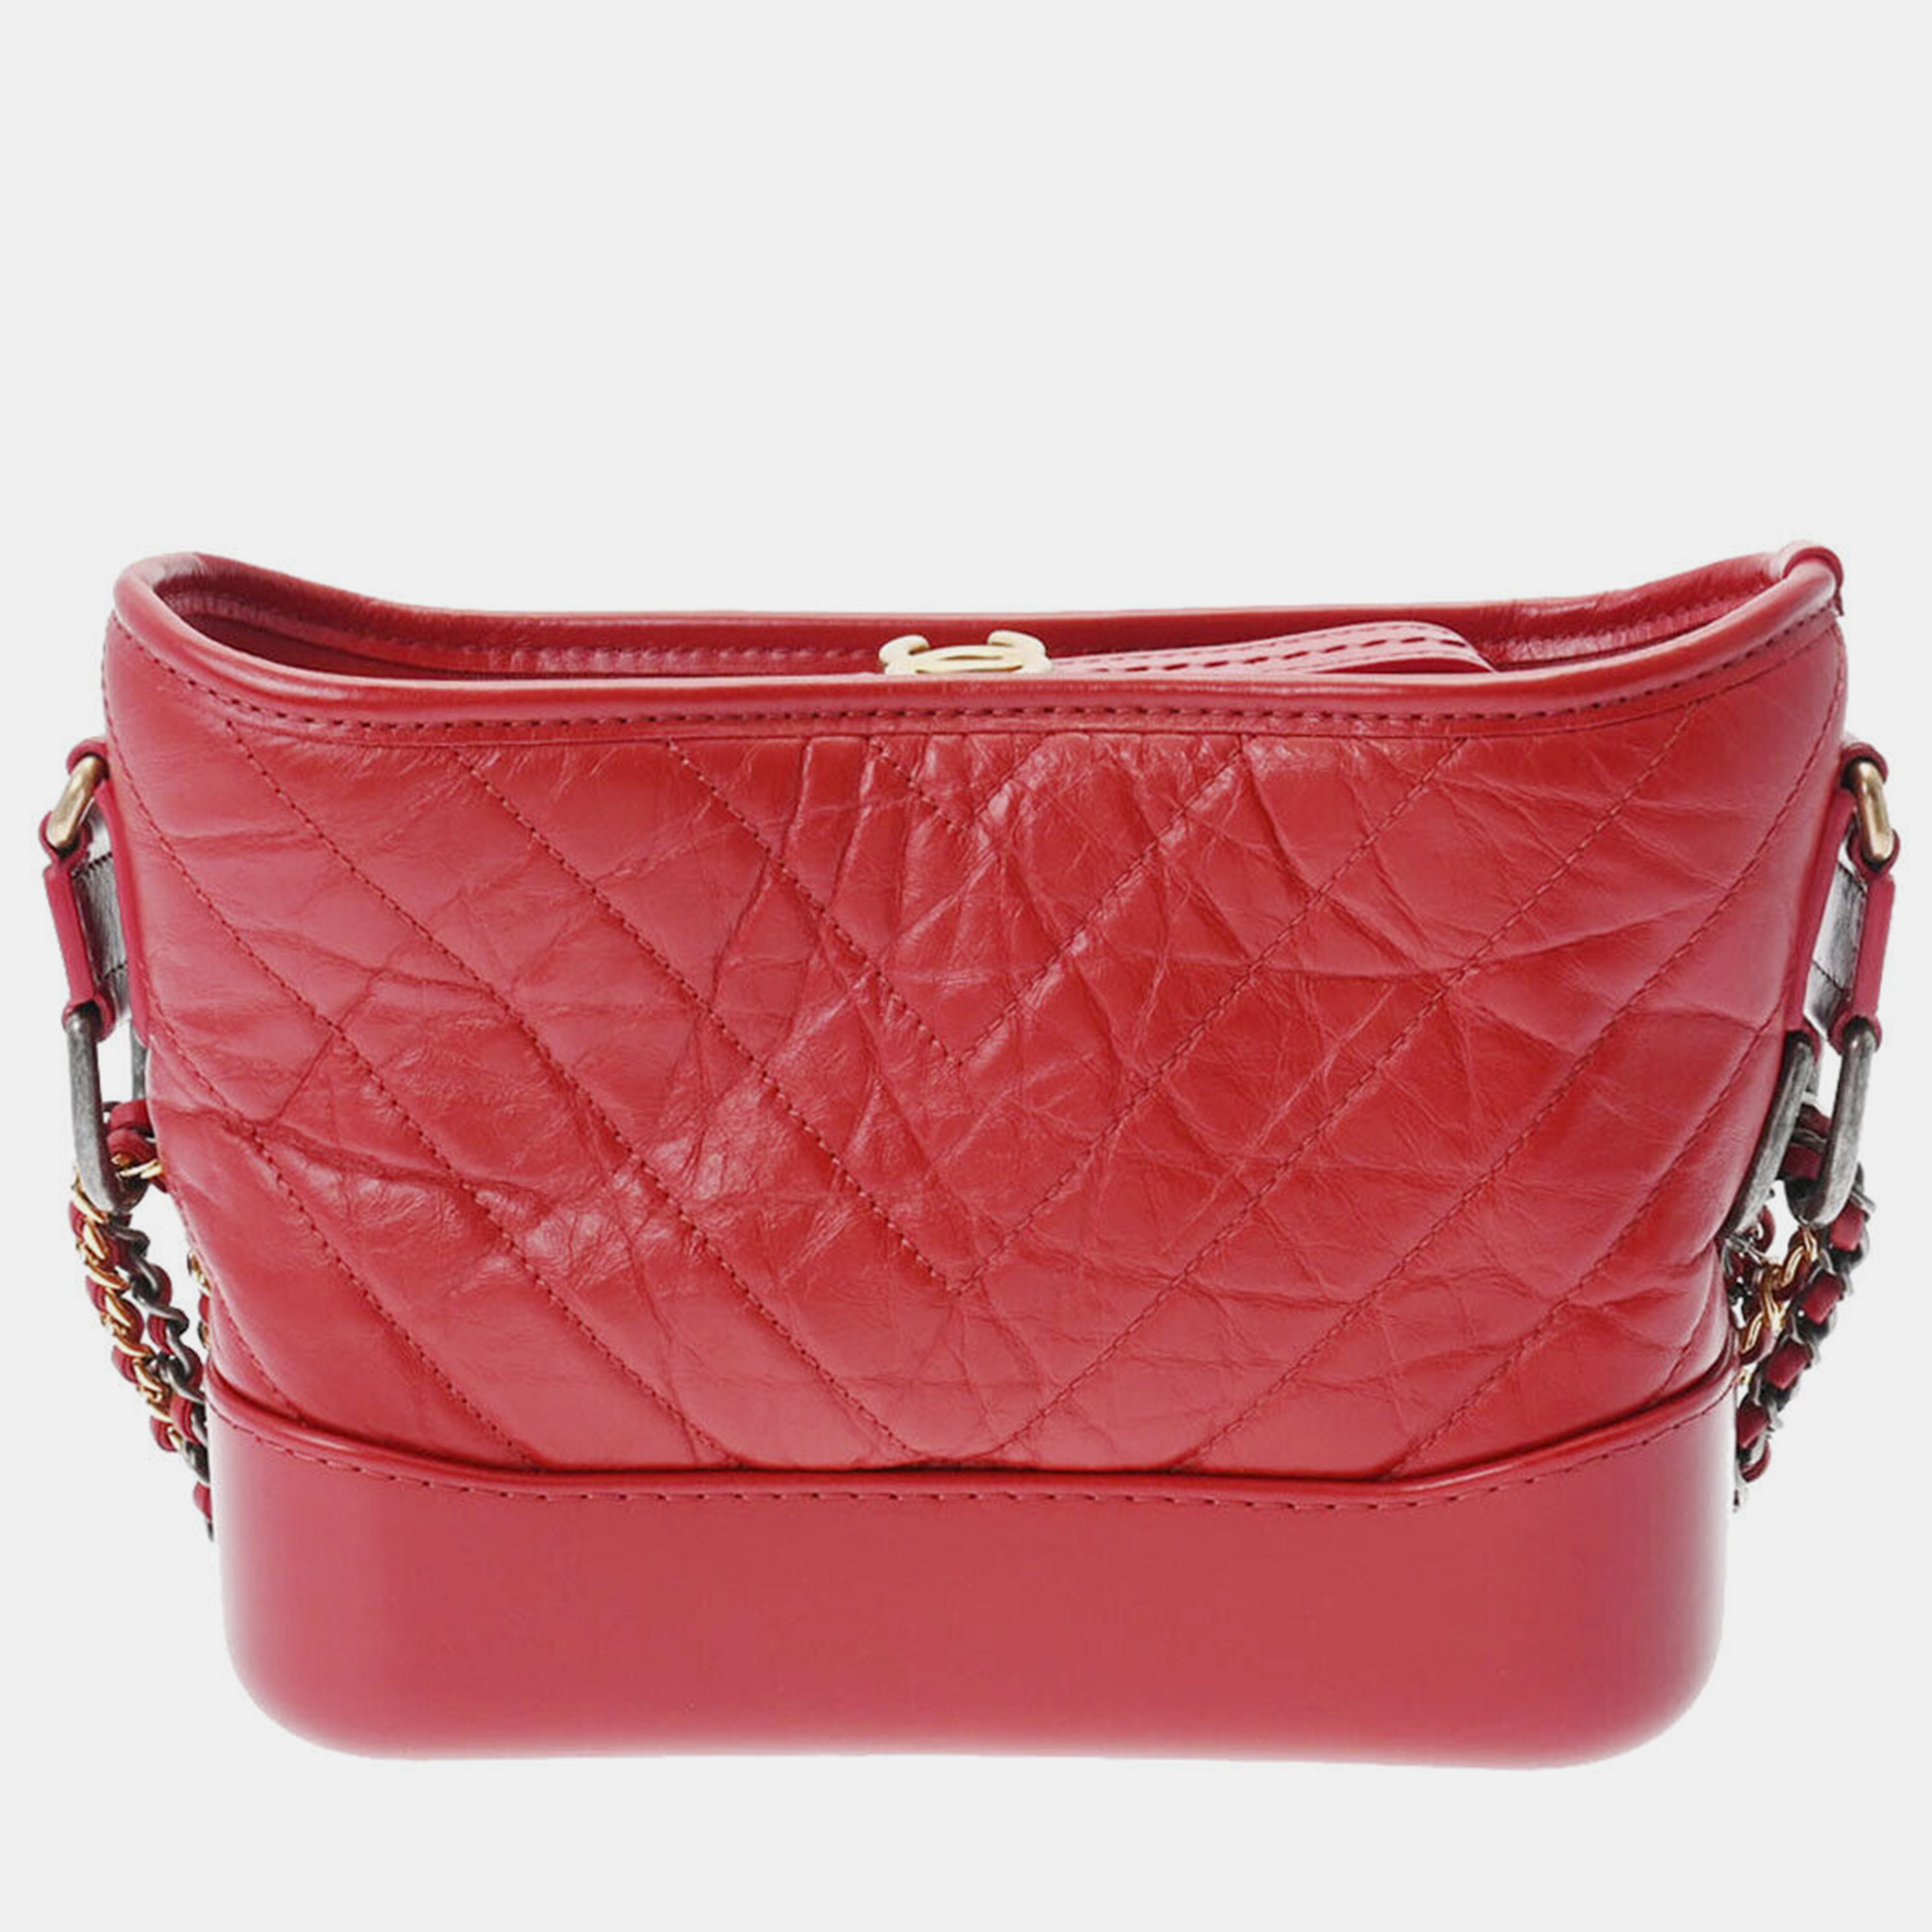 Chanel red leather small gabrielle shoulder bags